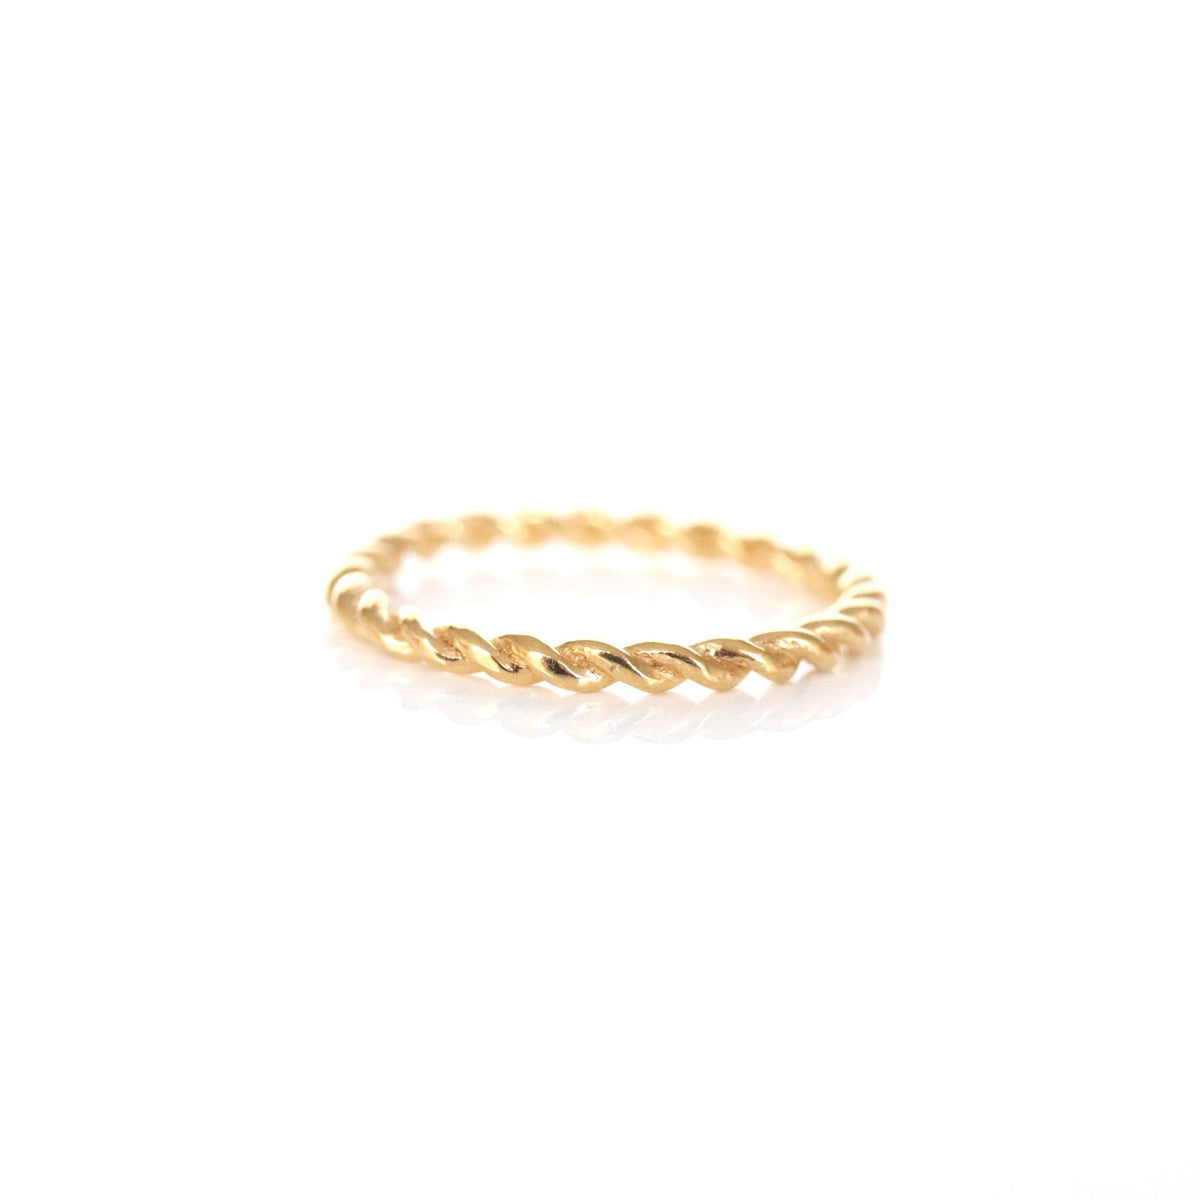 POISE THIN CABLE LINK BAND RING - SOLID 14K GOLD - SO PRETTY CARA COTTER